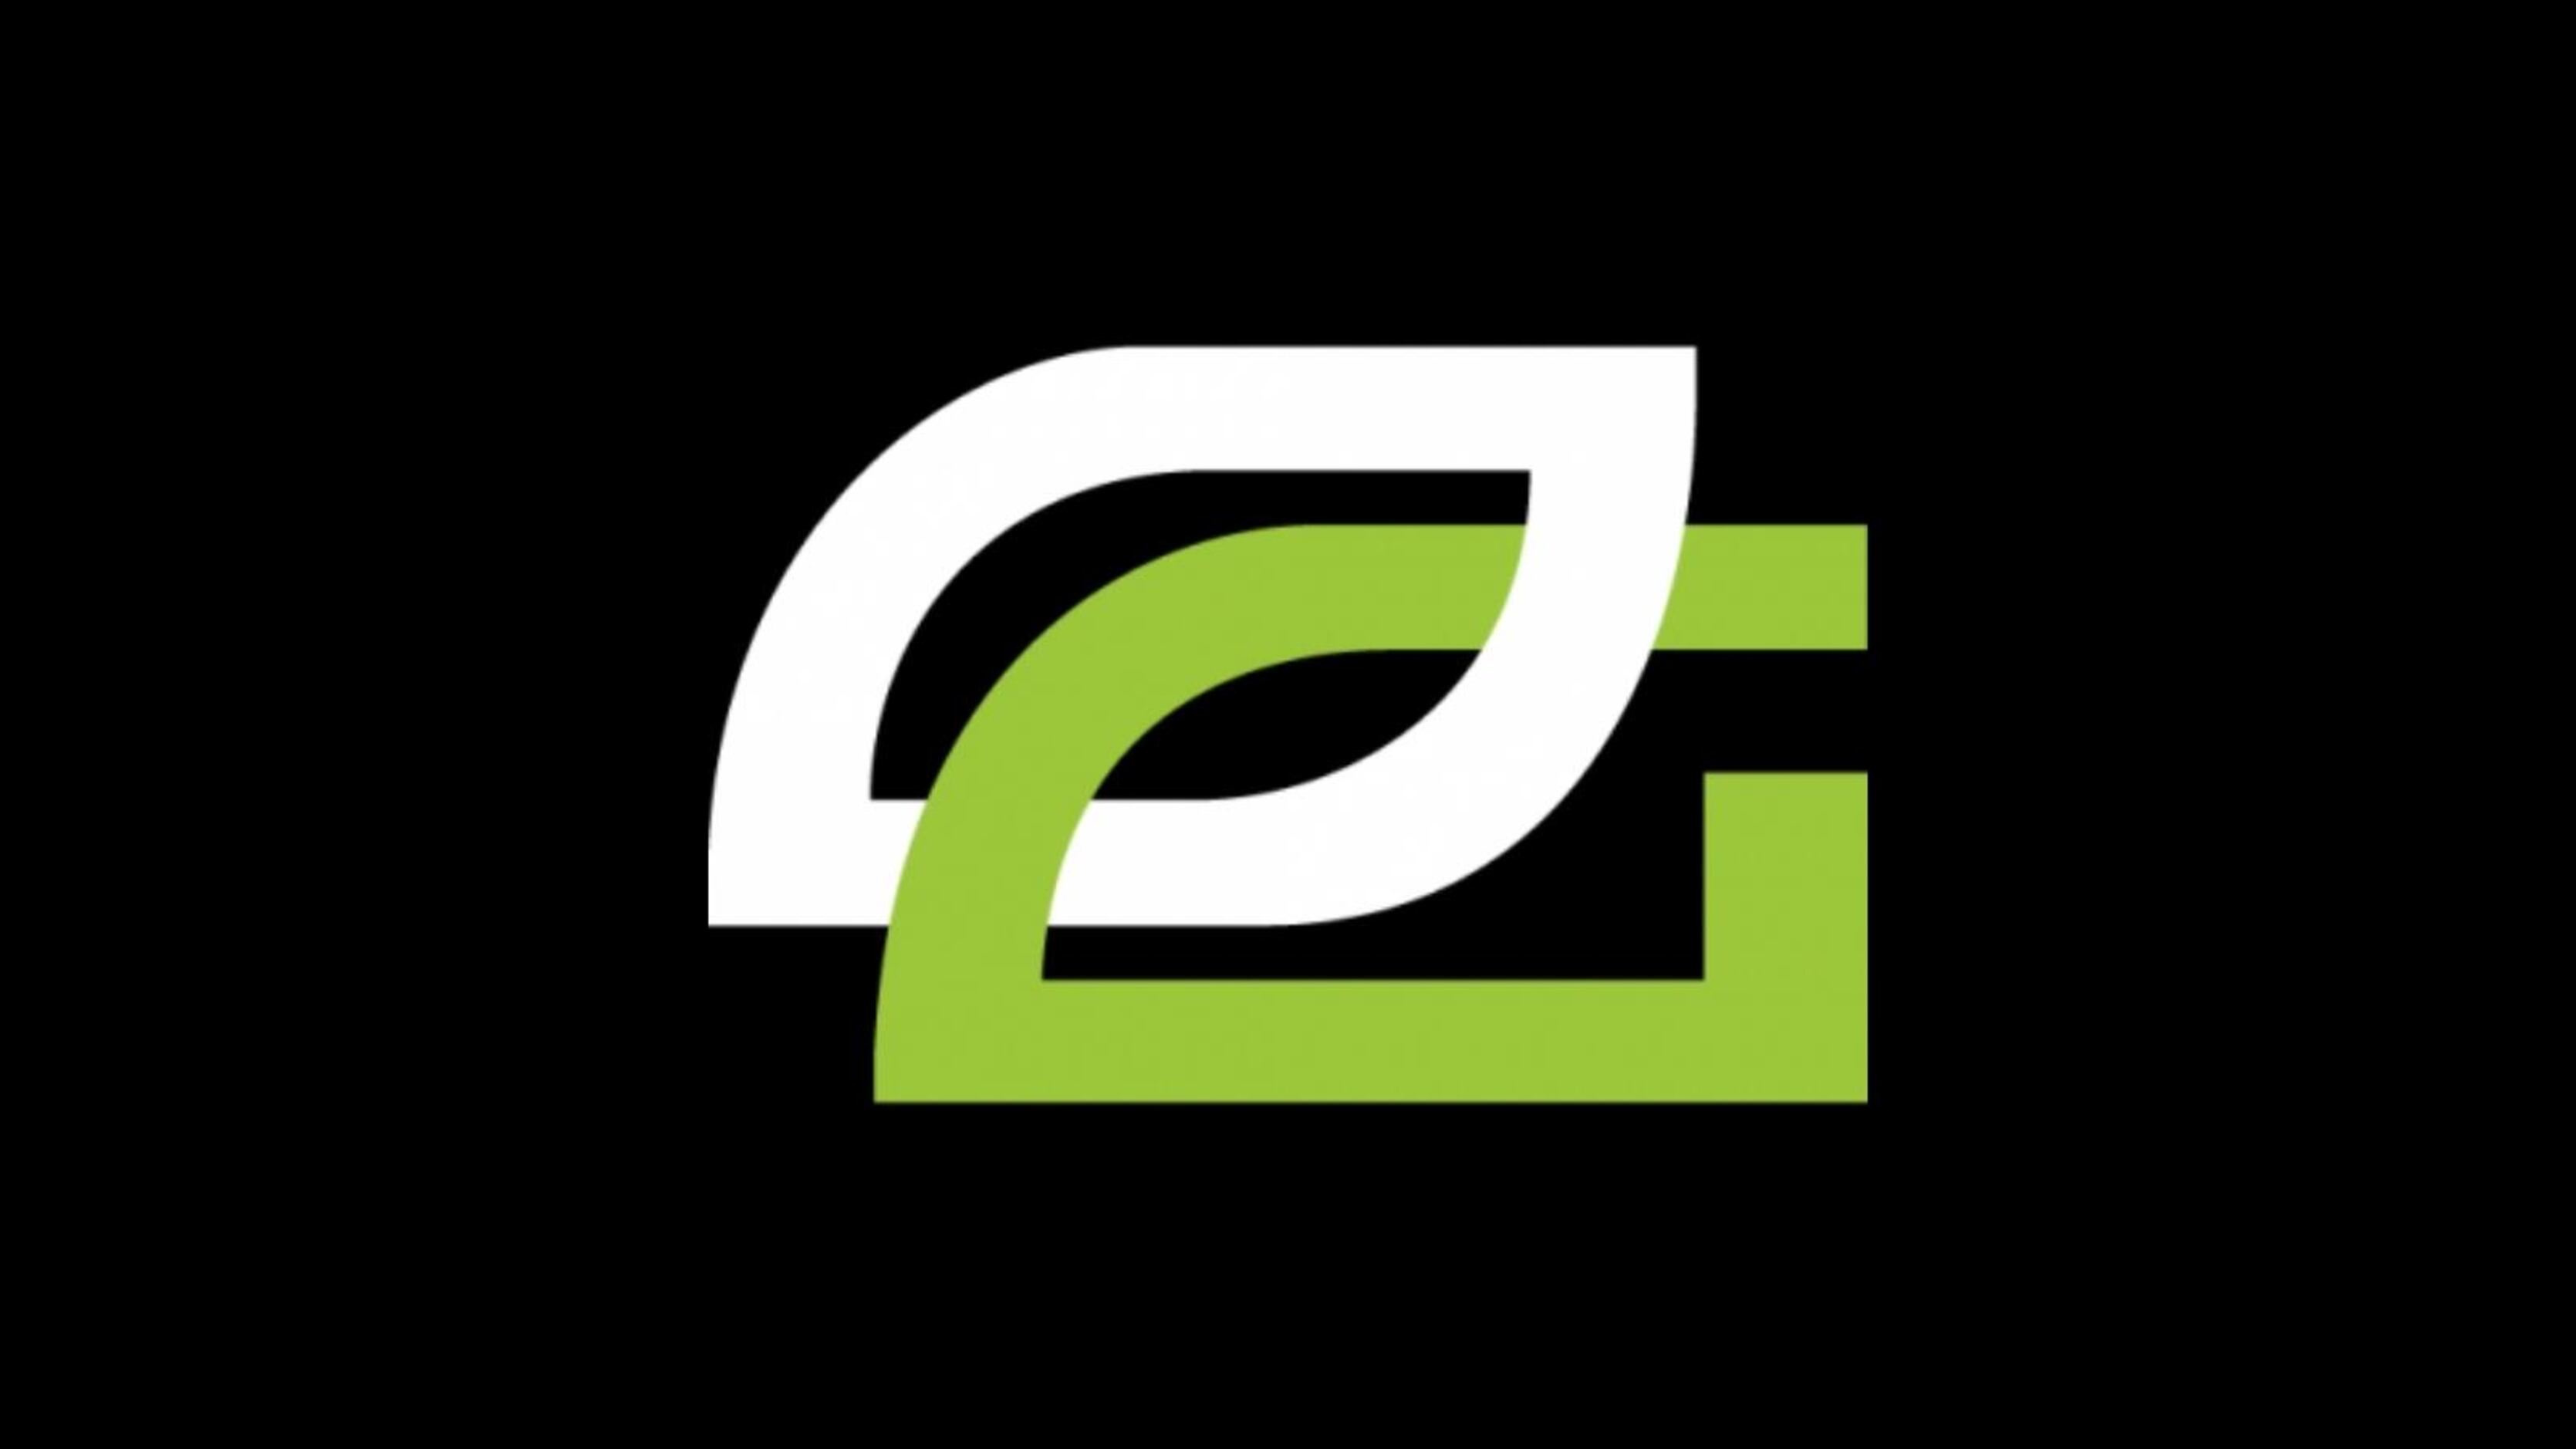 OPTIC GAMING ARE YOUR 2022 HALO WORLD CHAMPIONS!